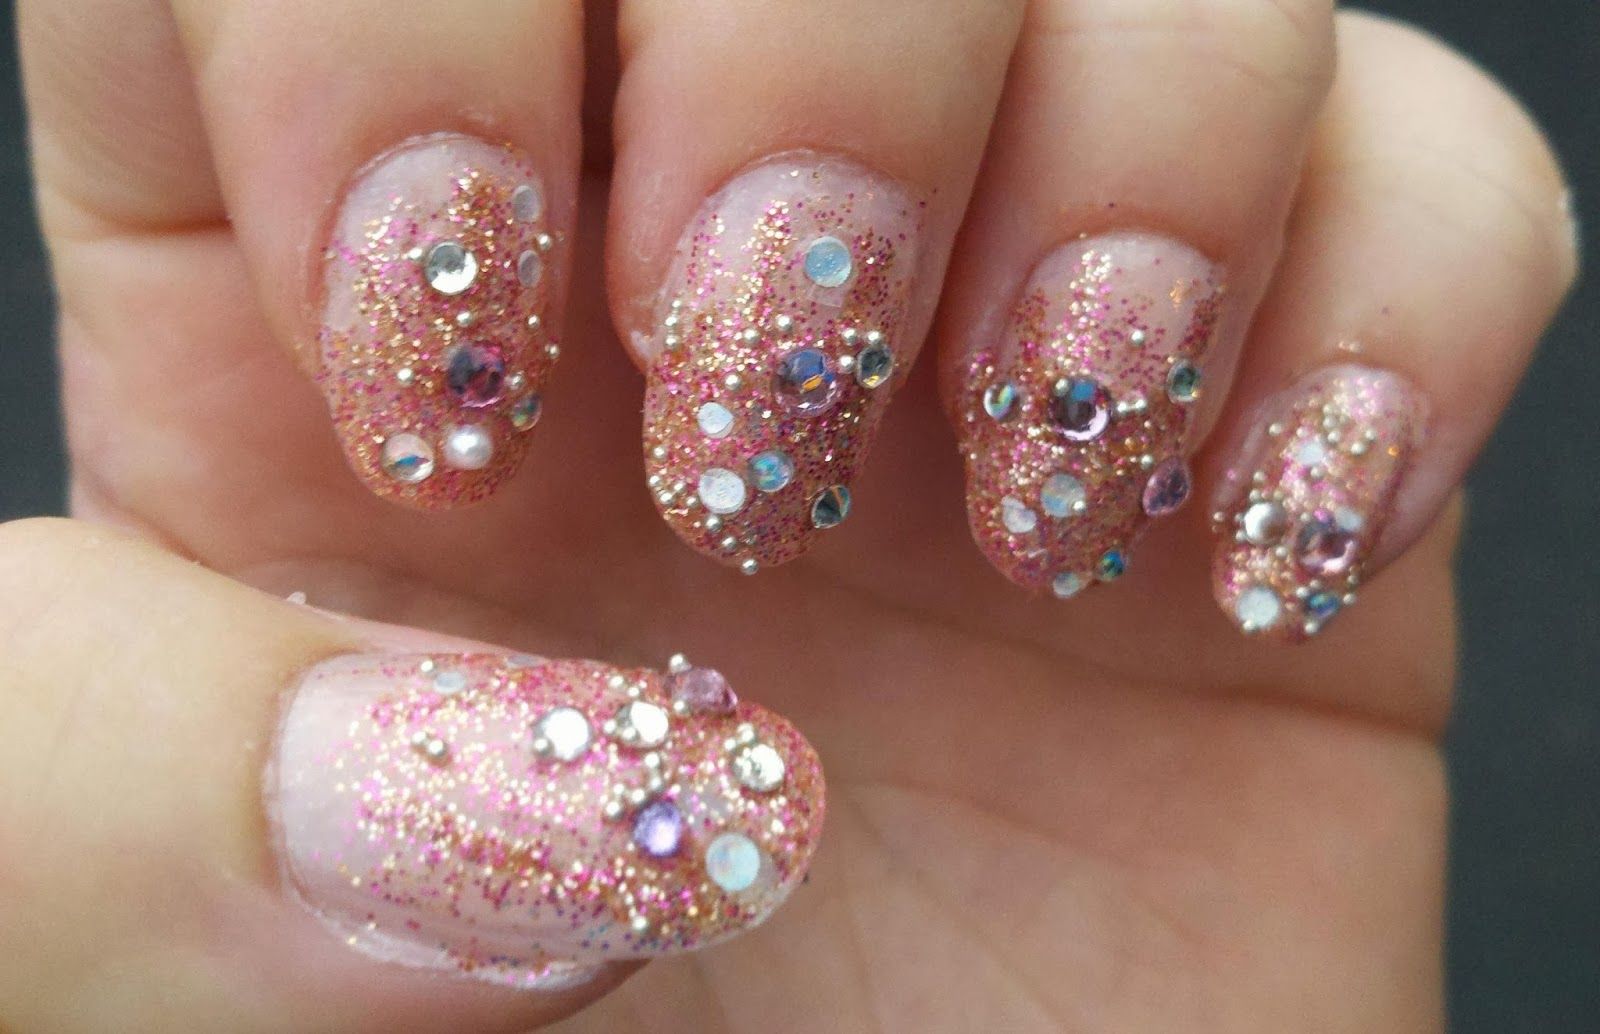 HD Nail Art Pictures - wide 9